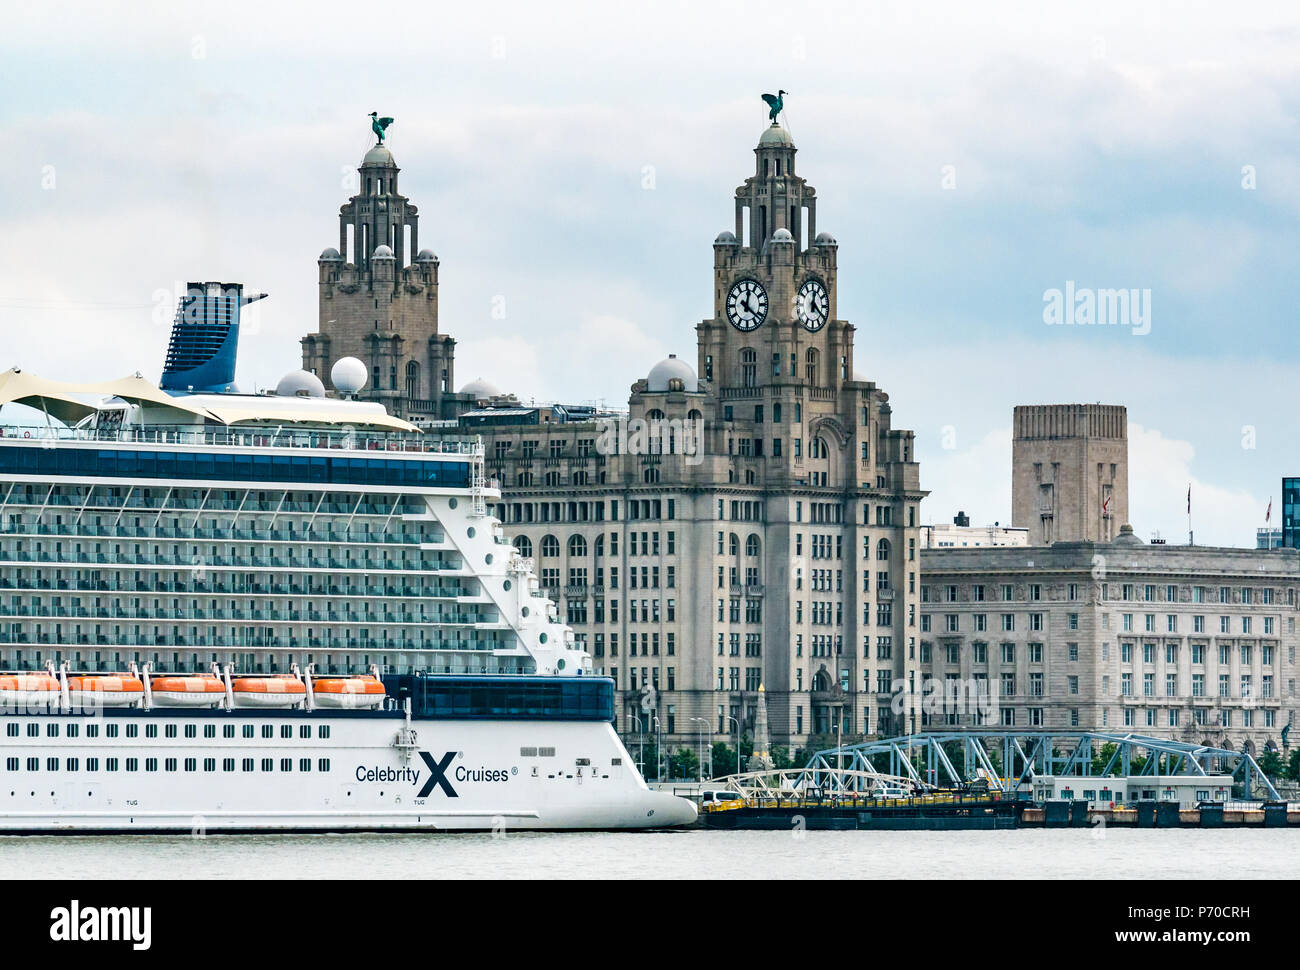 View of clock towers of Royal Liver building with Liver Birds and UK's largest clocks, Celebrity Cruise ship, Pier Head, Liverpool, England, UK Stock Photo